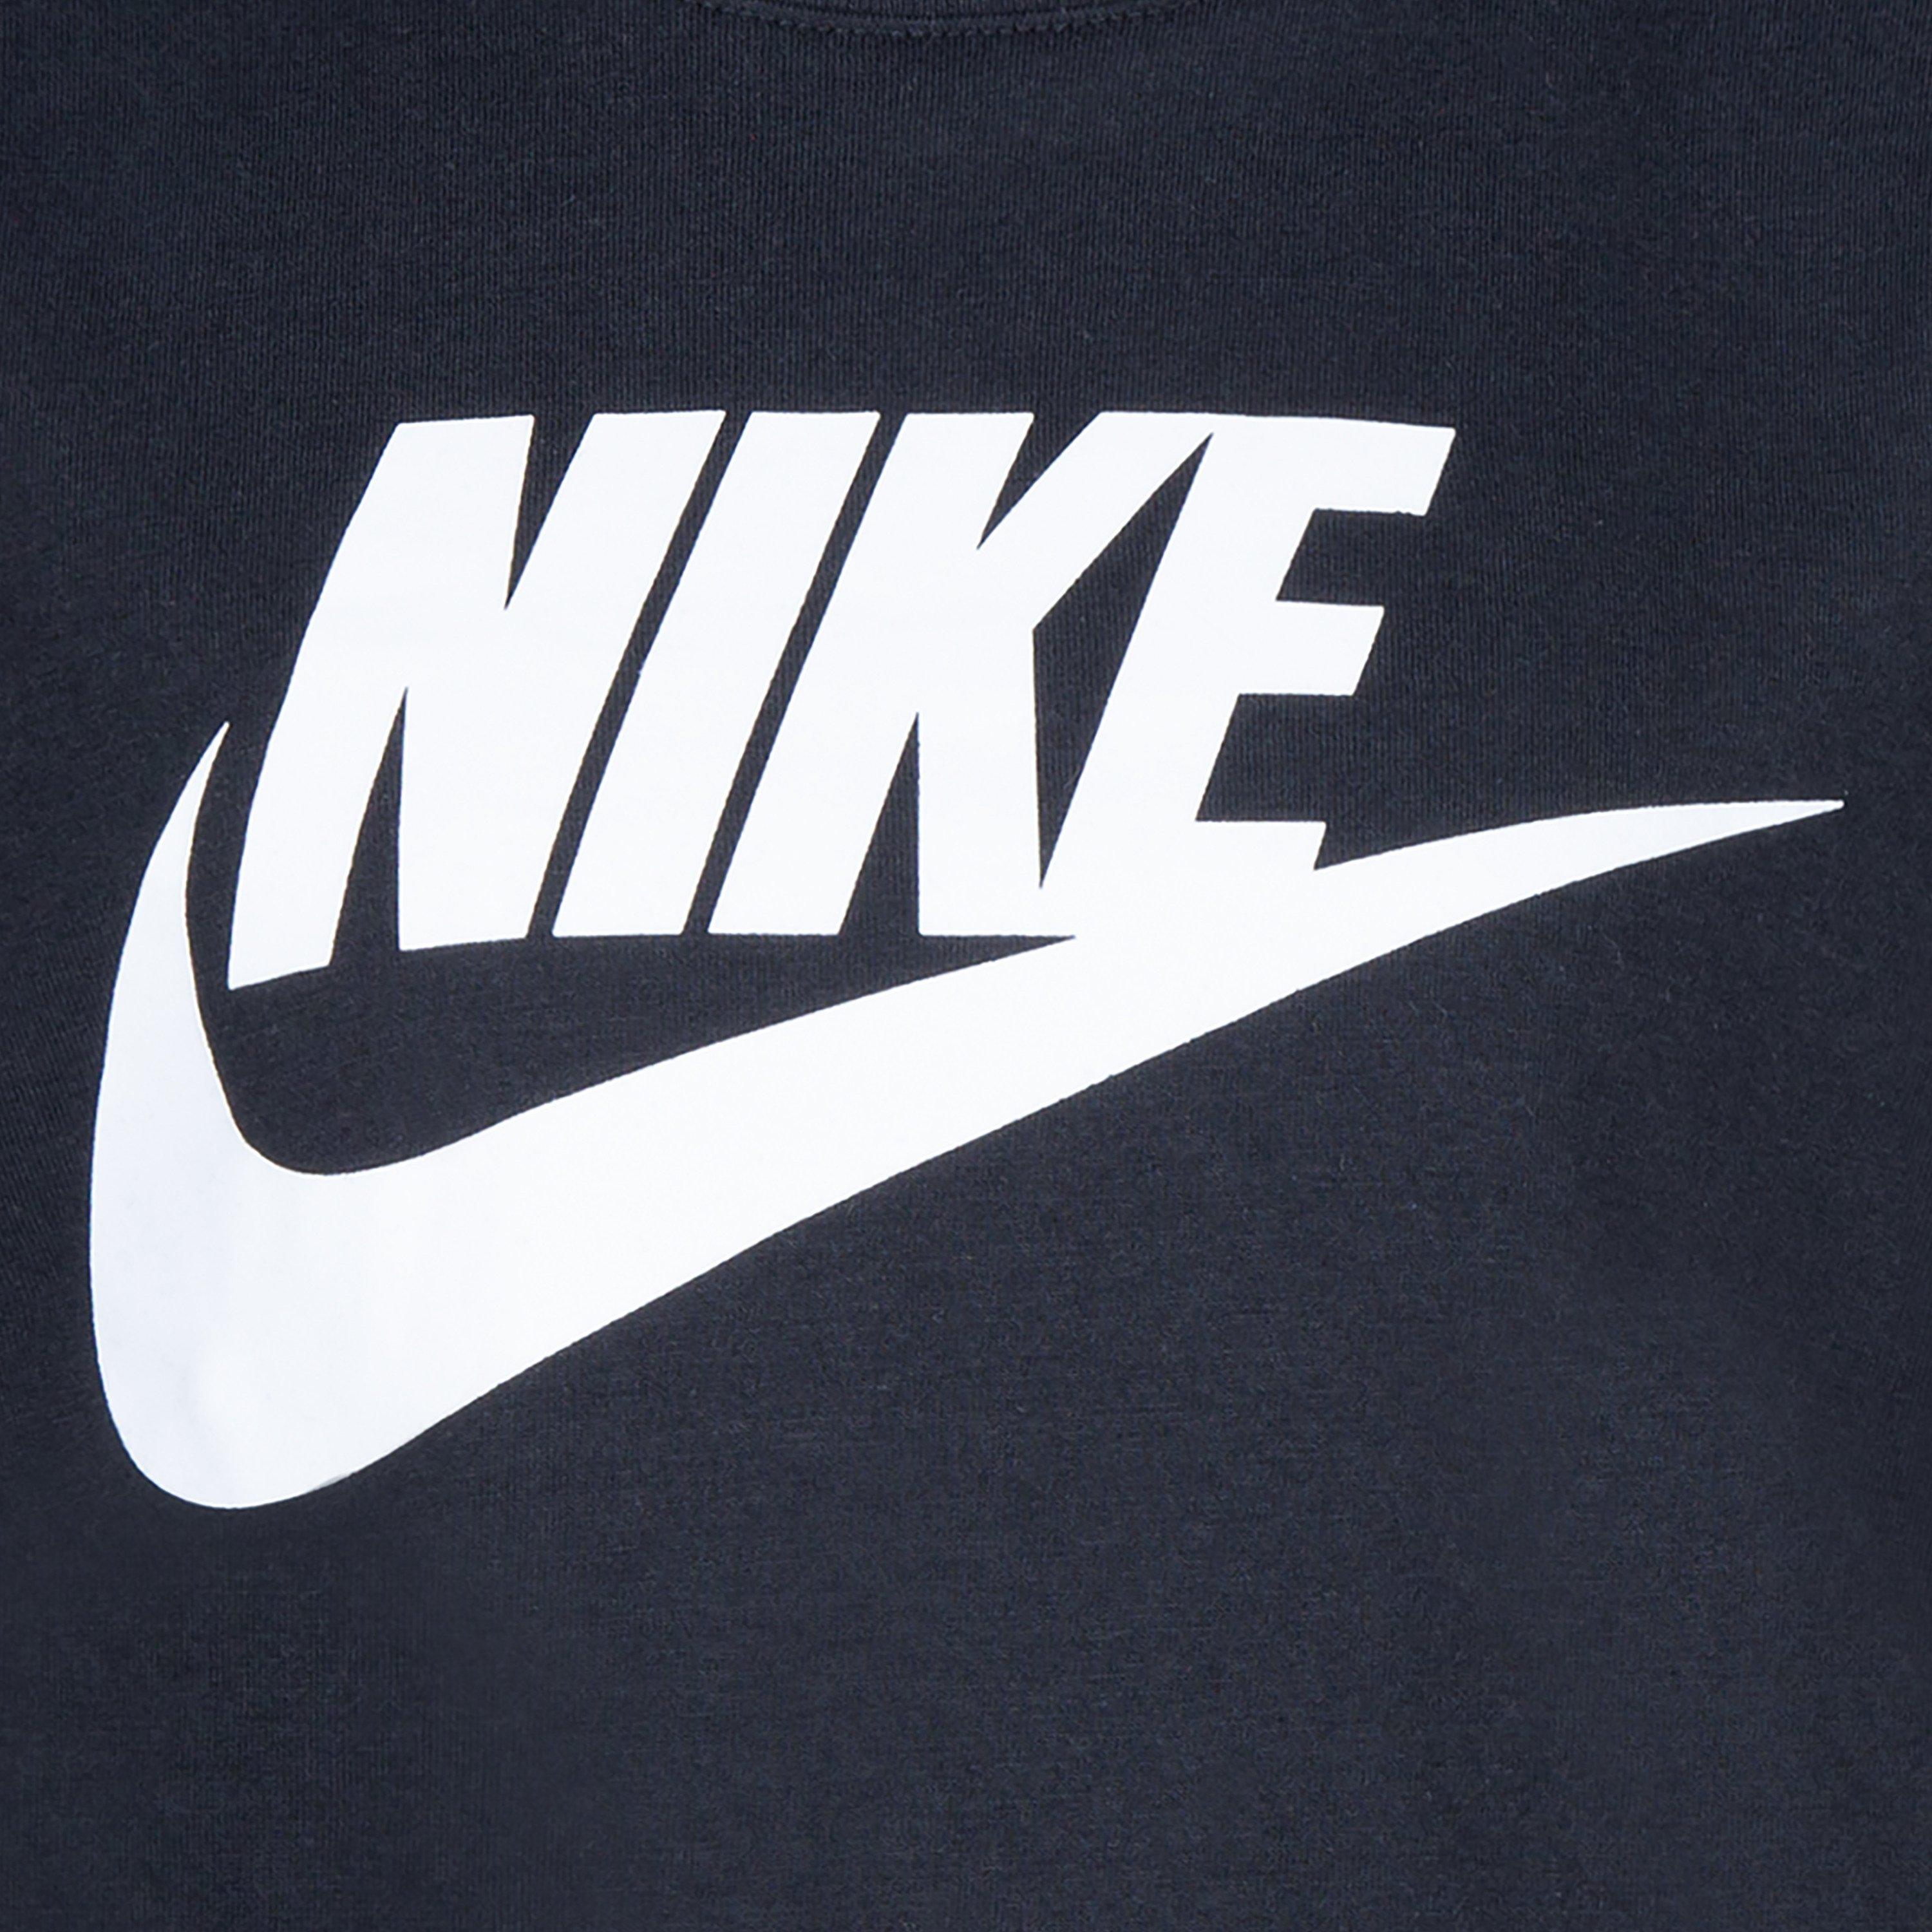 Nike Roblox T Shirt Infant Boys - White Size 4 - 5 Years